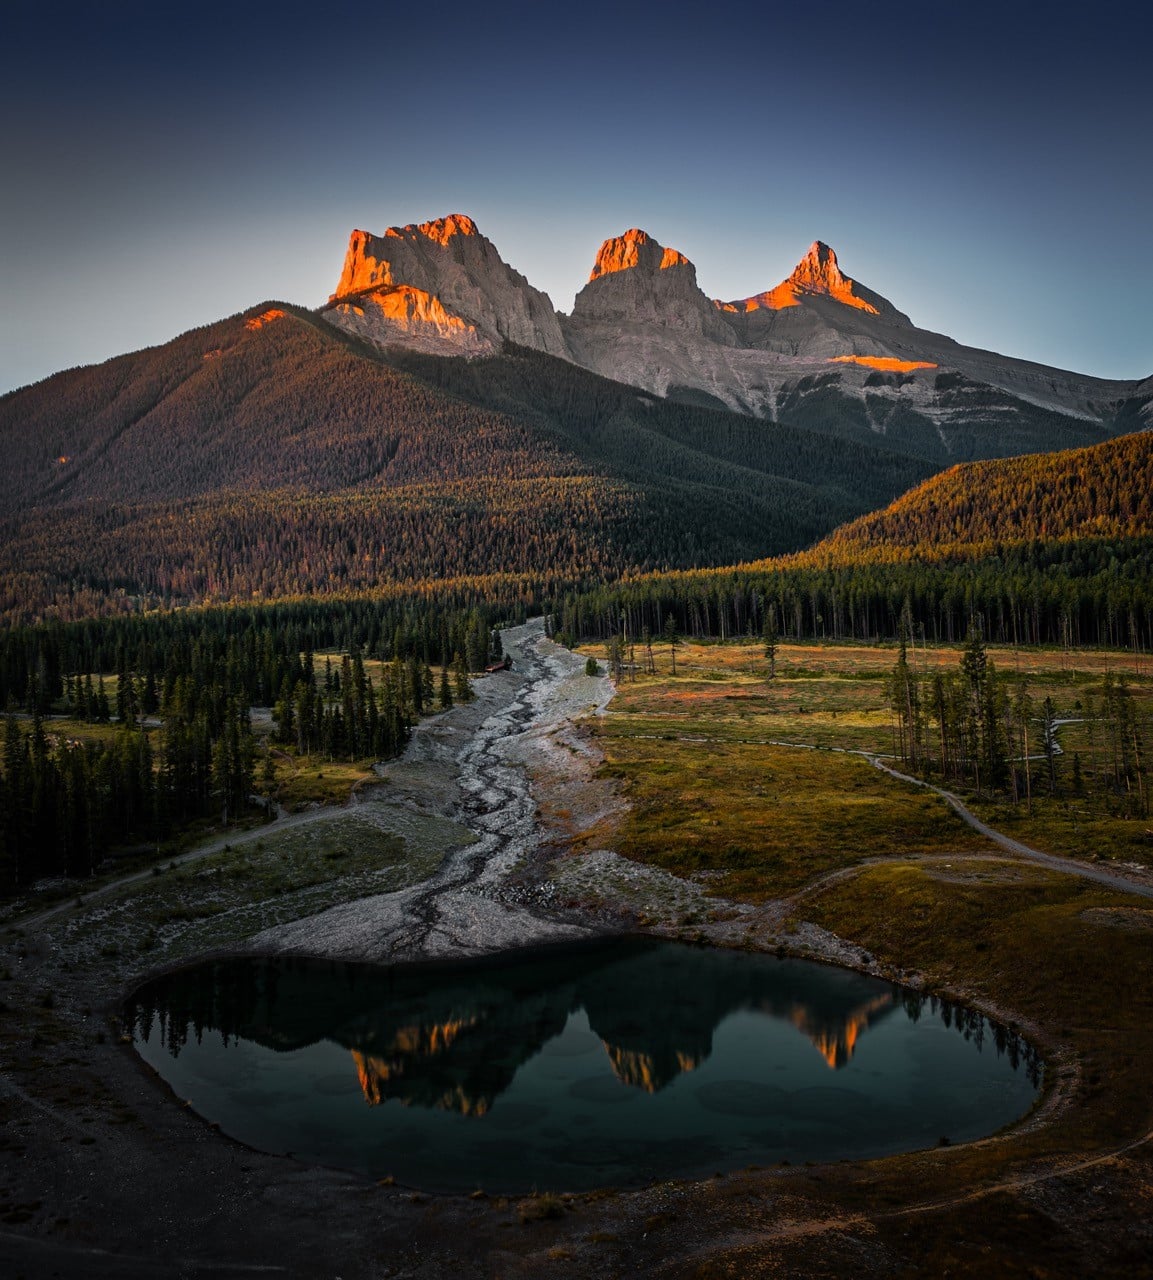 The Three Sisters mountains are reflected in a small lake at sunset in Canmore, Alberta